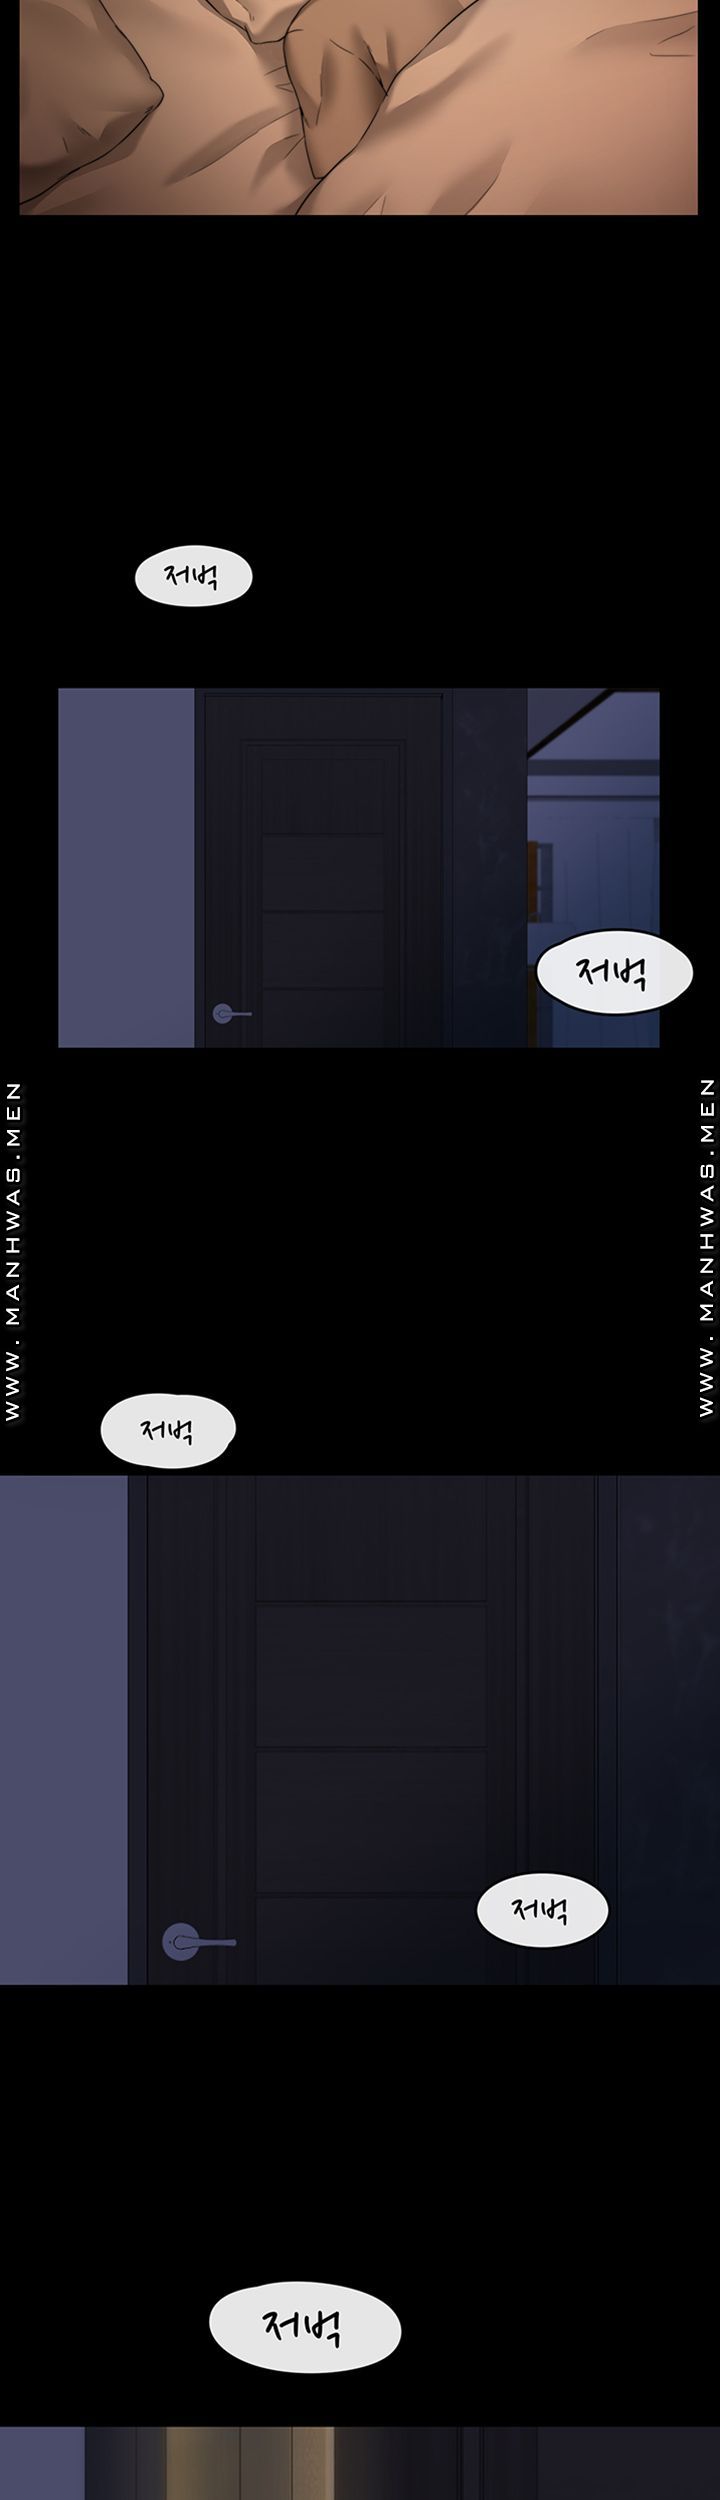 Different Dream Raw - Chapter 1 Page 2